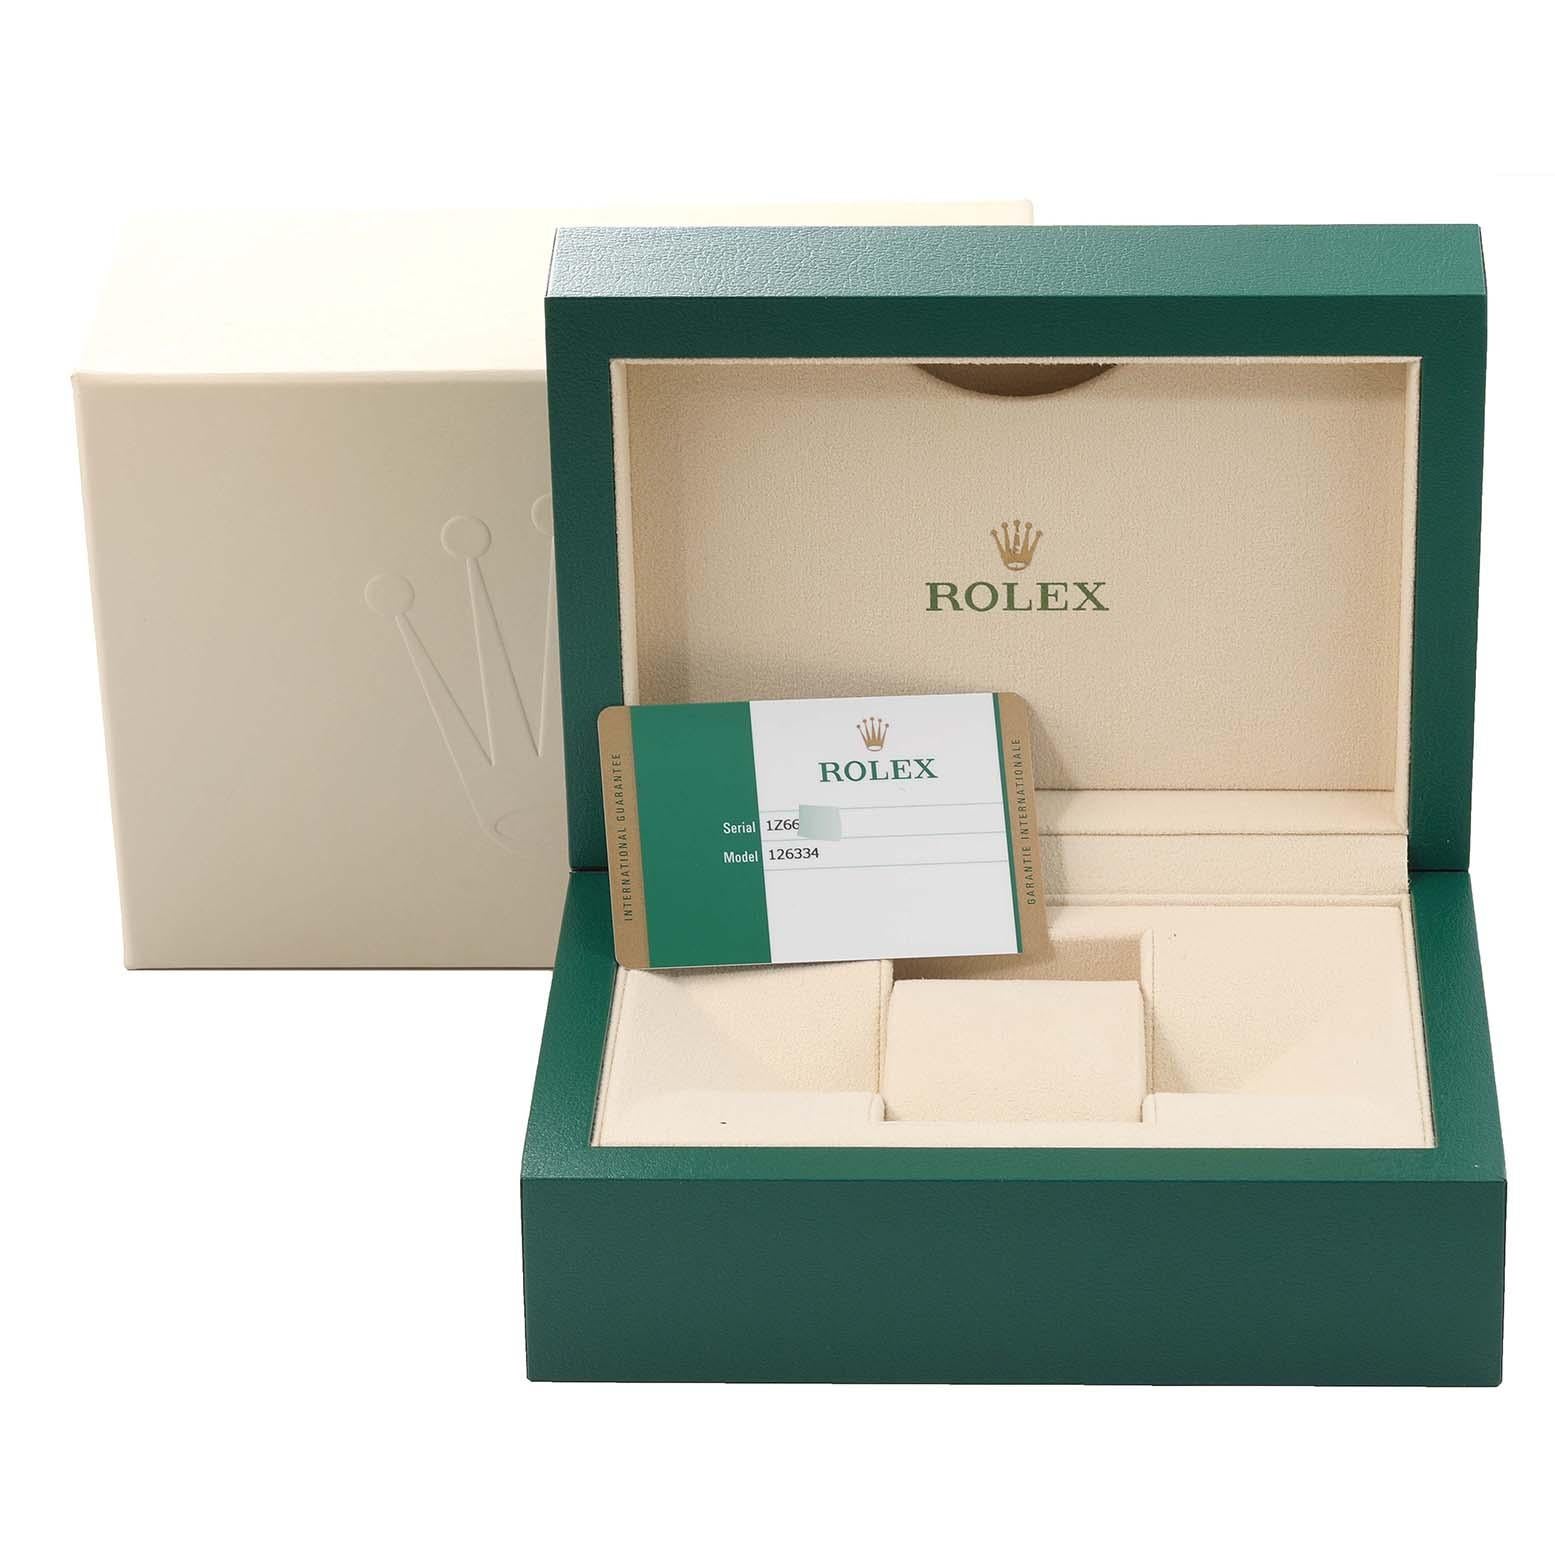 Rolex Datejust 41 Steel White Dial Oyster Bracelet Mens Watch 126334 Box Card For Sale 8